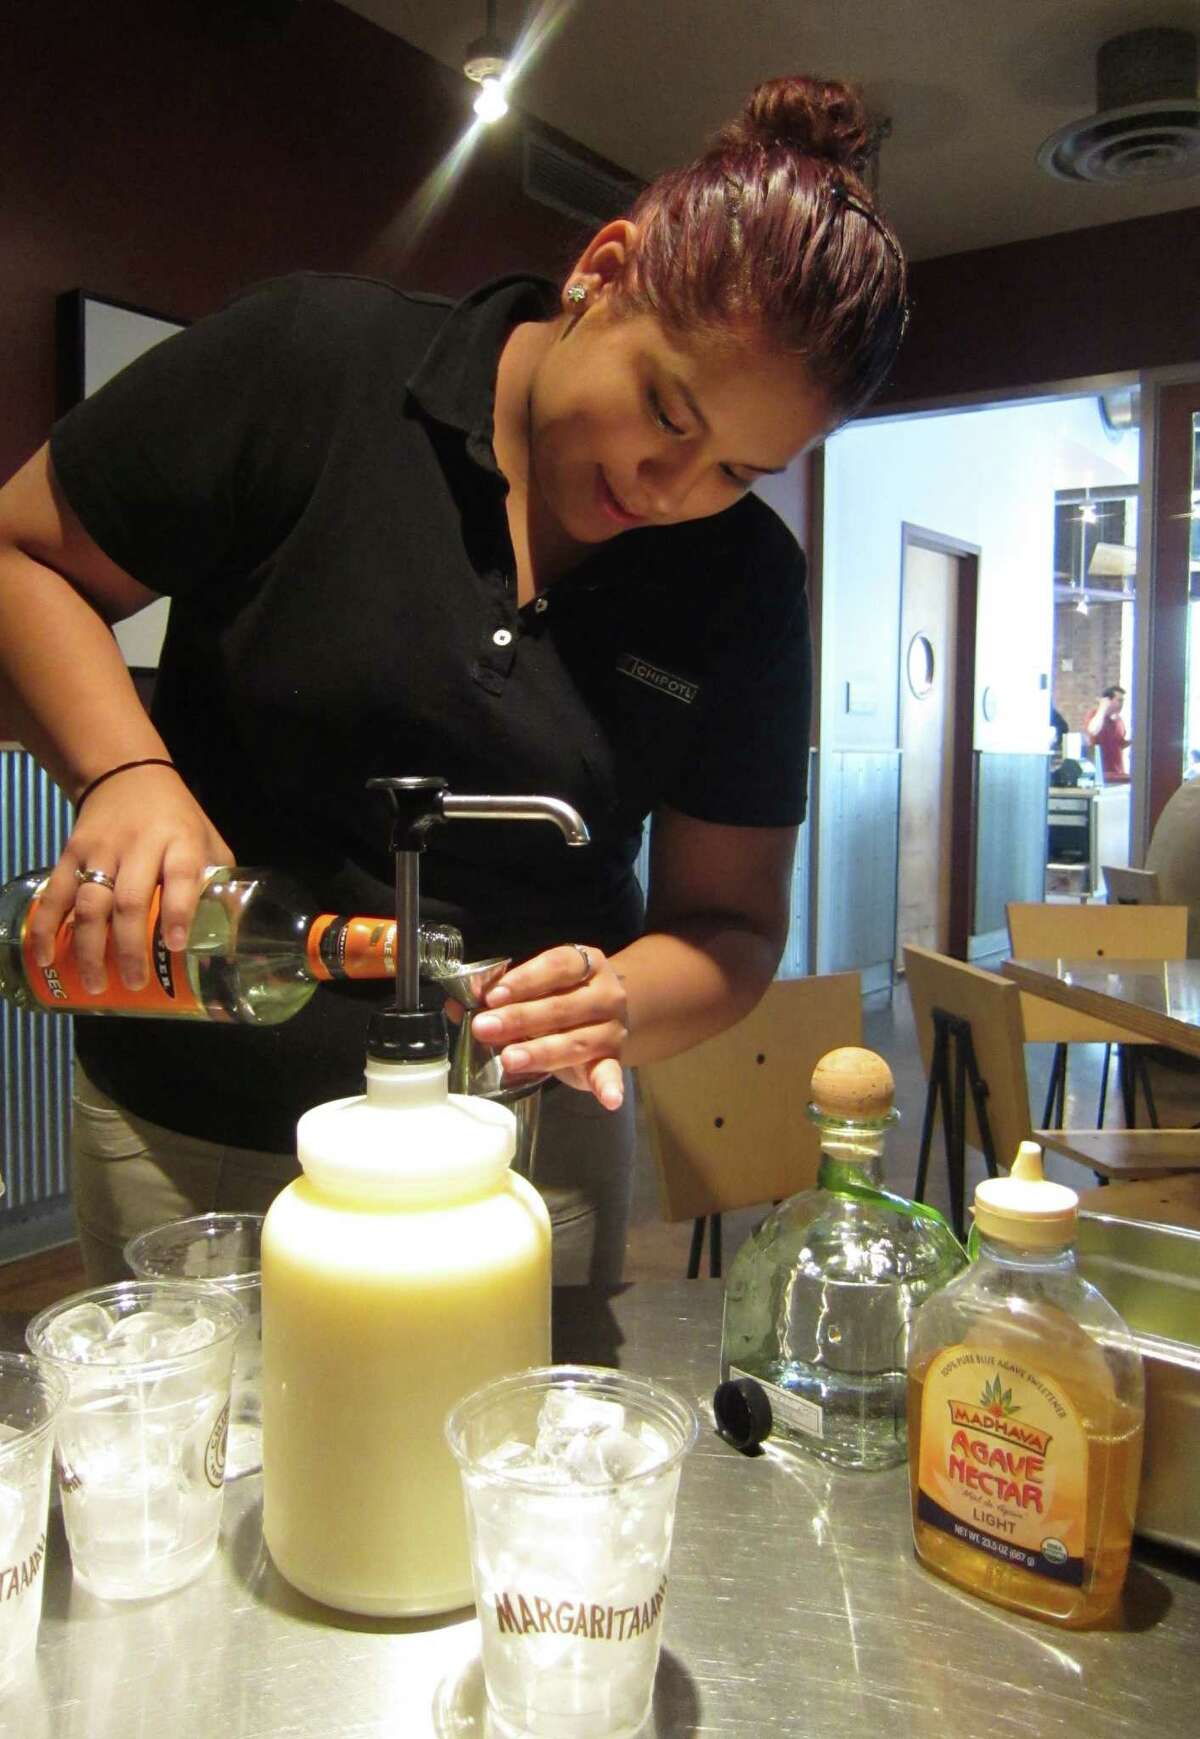 Sandra Maya, manager of the Chipotle Mexican Grill at 909 Texas Ave., makes a hand-shaken magarita with Patron tequila, agave nectar, Triple sec and fresh citrus juice. The top shelf magaritas will be rolled out nationally beginning April 29, 2013.